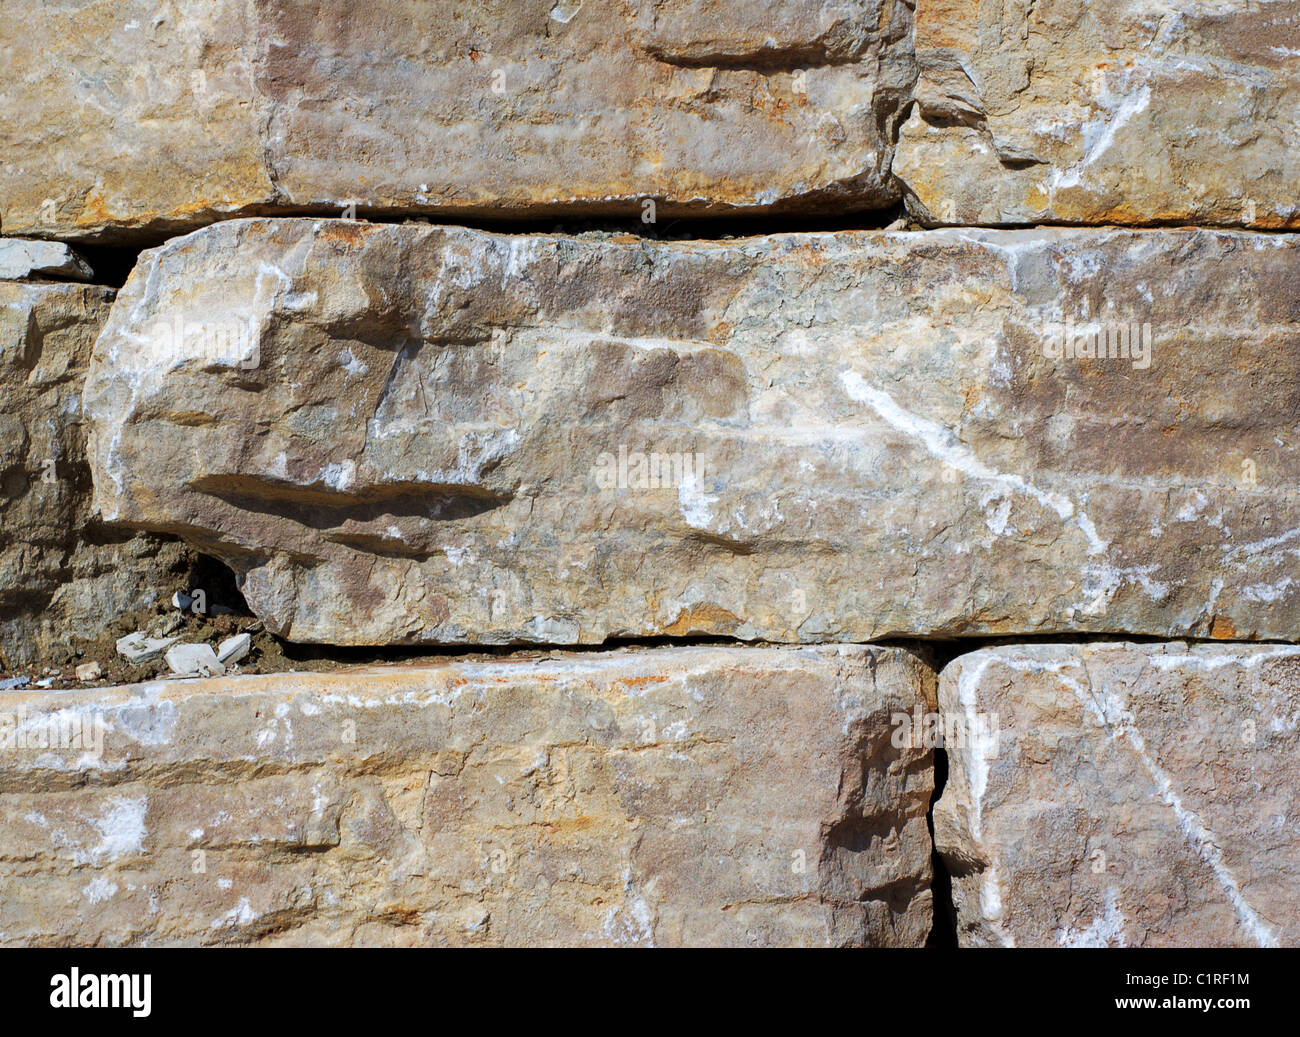 Abstract background with dry stones Stock Photo